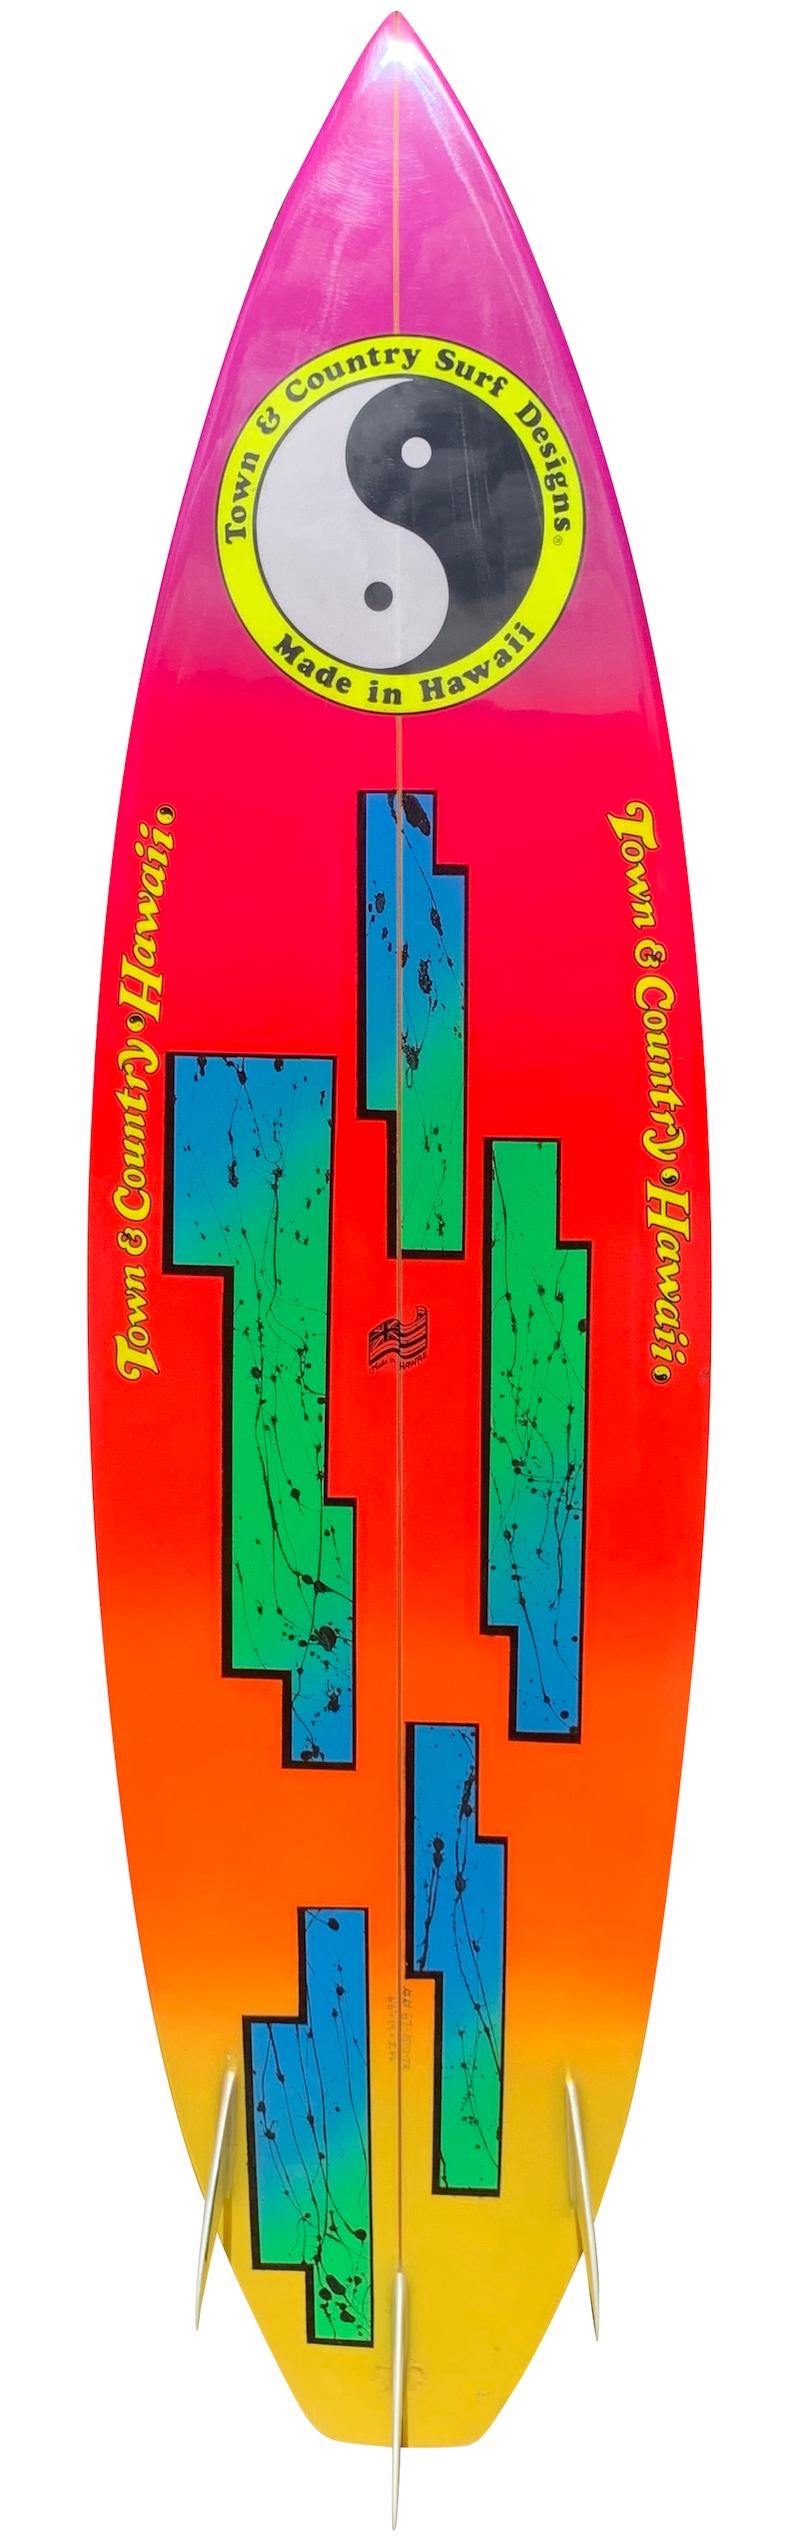 1987 Town & Country thruster (tri-fin) short board surfboard shaped by Greg Griffin. Features a stunning 1980s airbrush design with glassed on fins. This surfboard has been fully restored by a restoration expert with over 40 years of experience. An